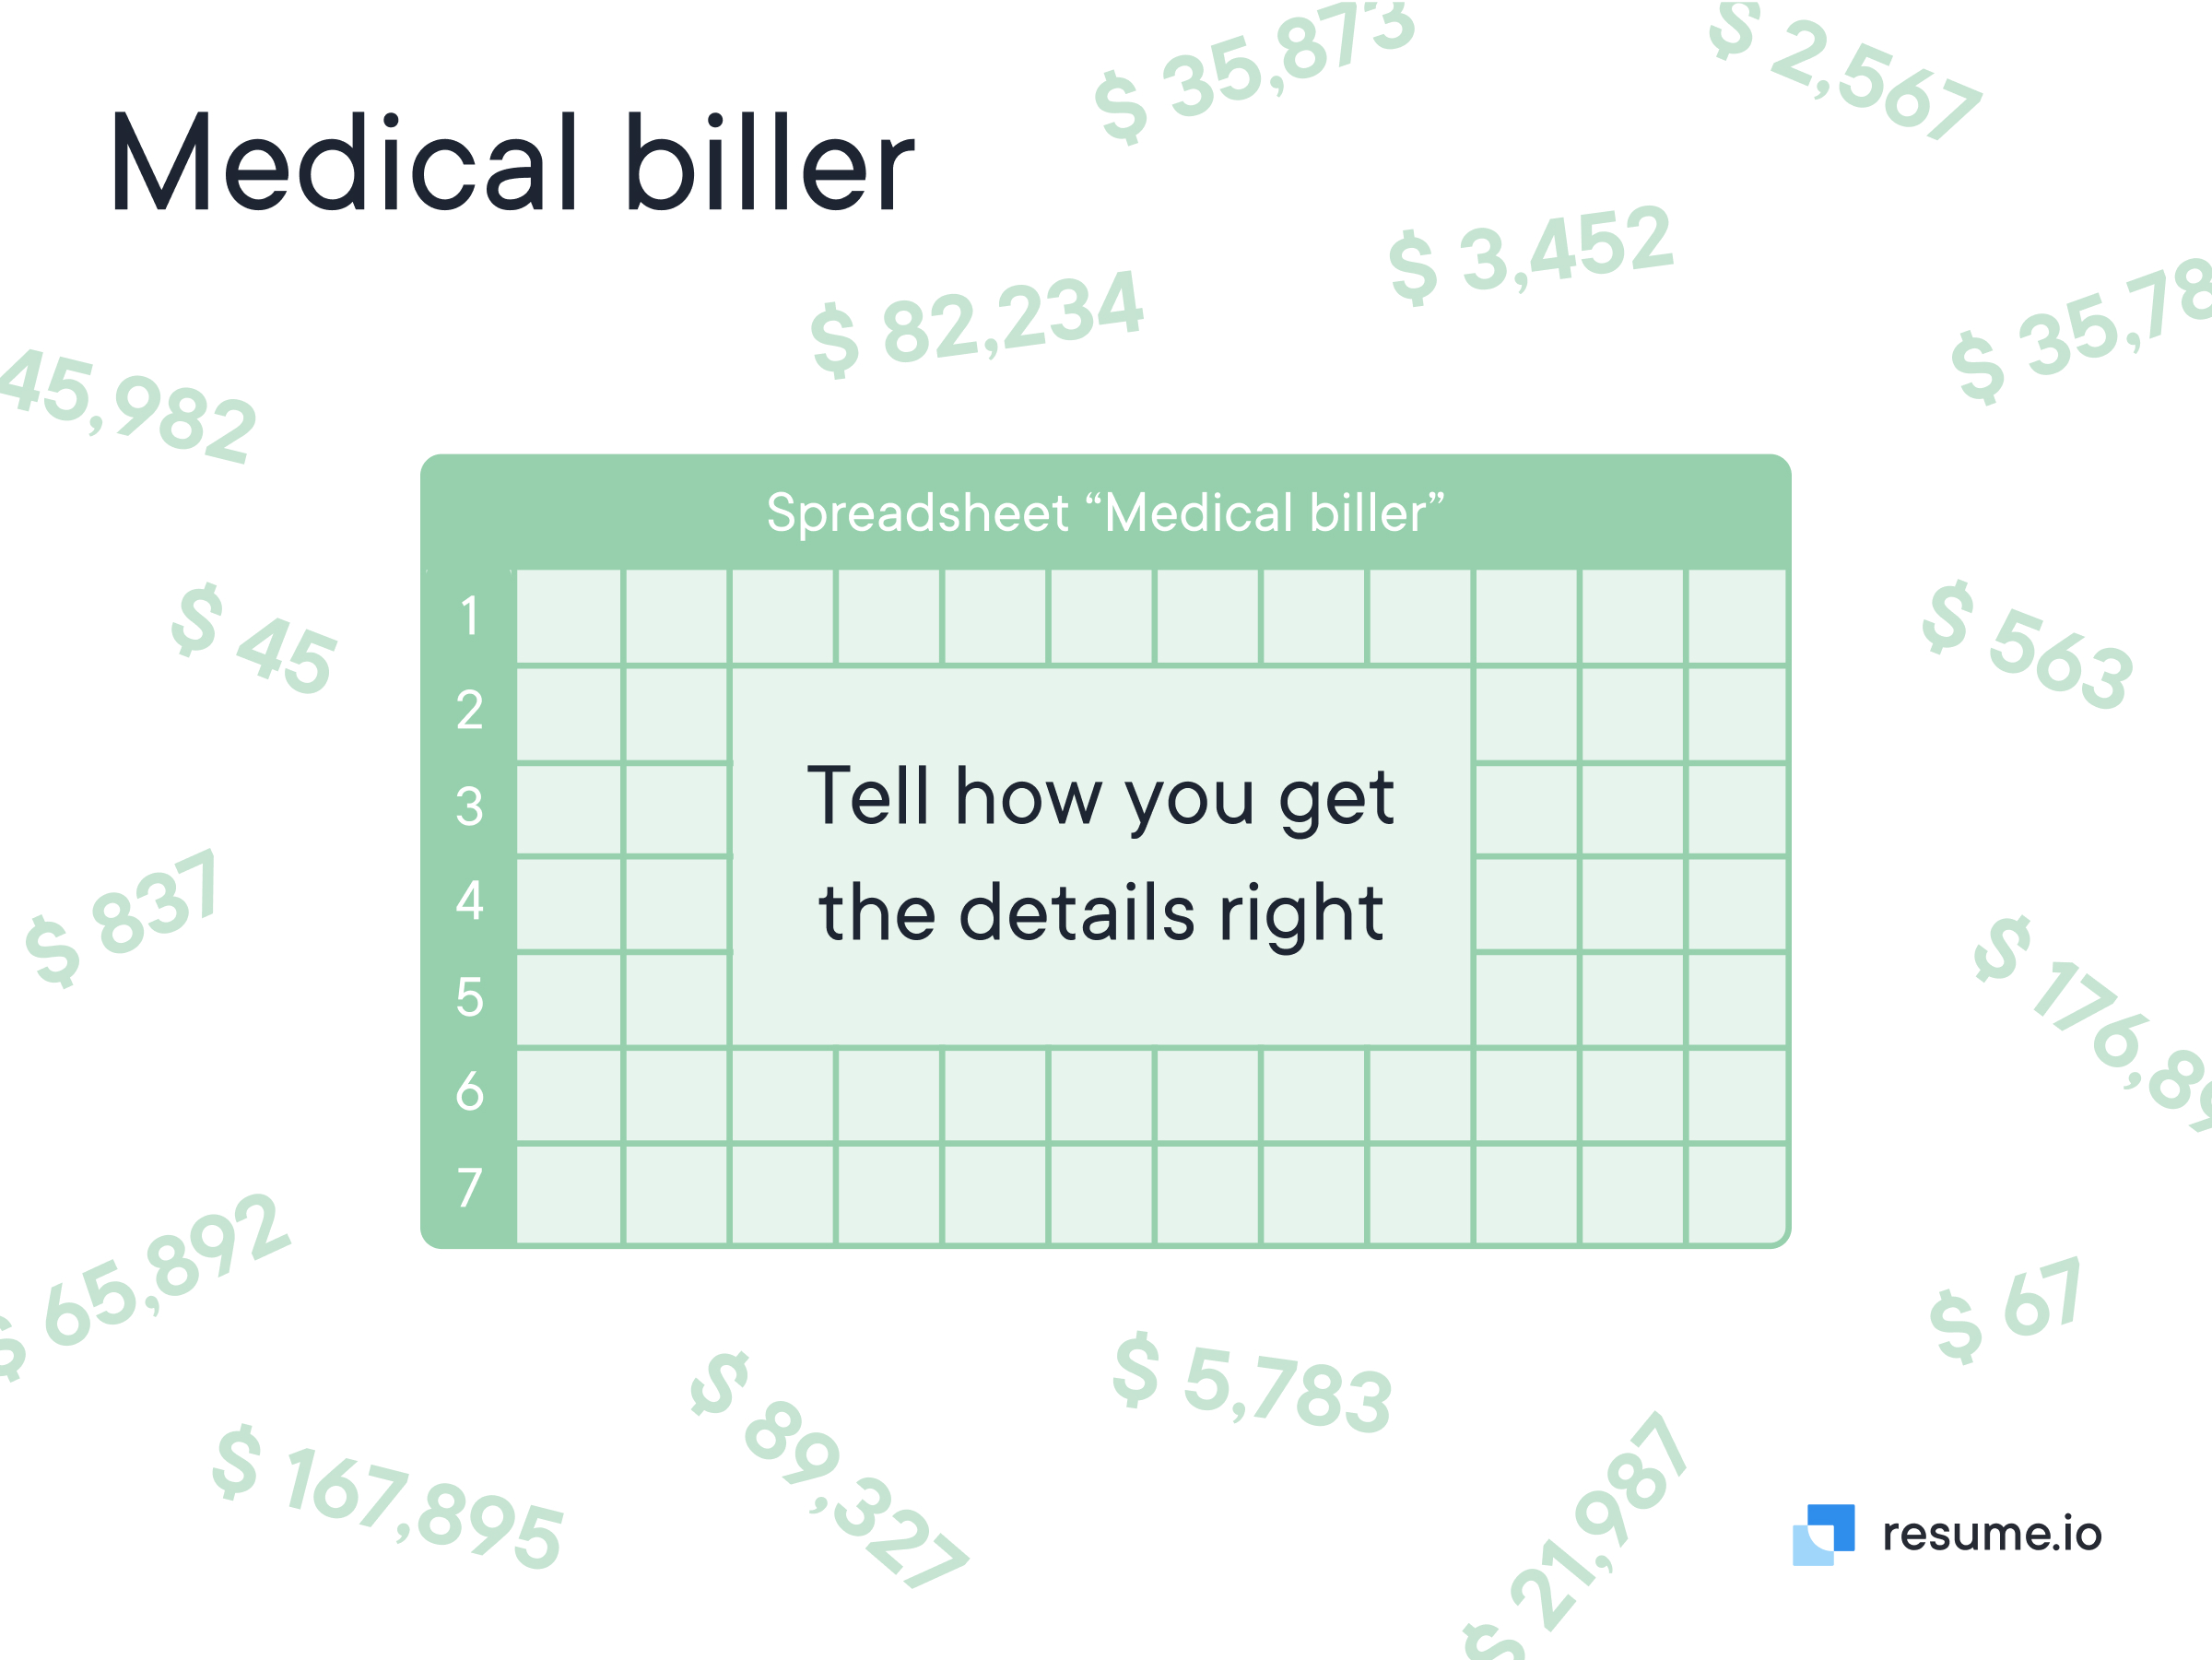 Green spreadsheet medical biller which tells you how to get the details right